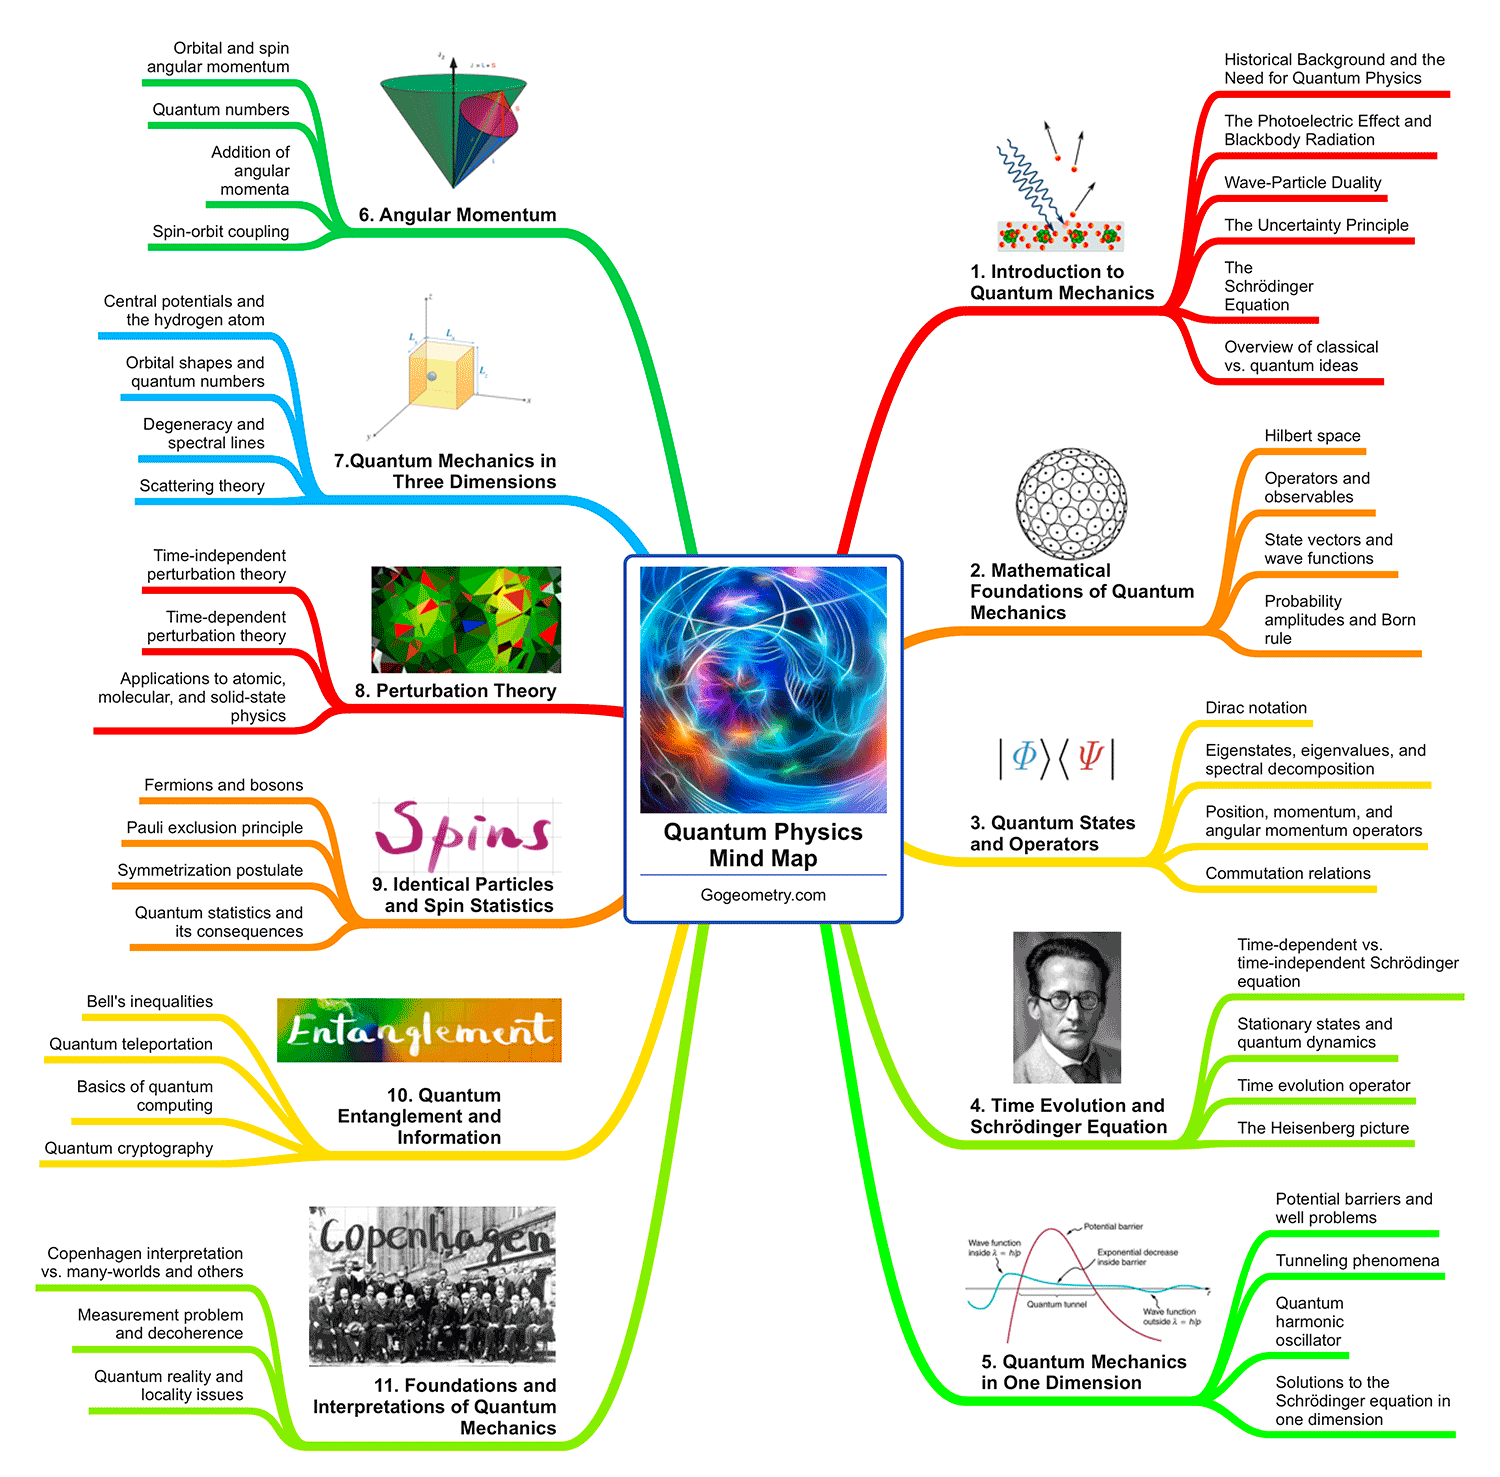 Detailed mind map of the university-level quantum physics course, covering fundamental and advanced concepts